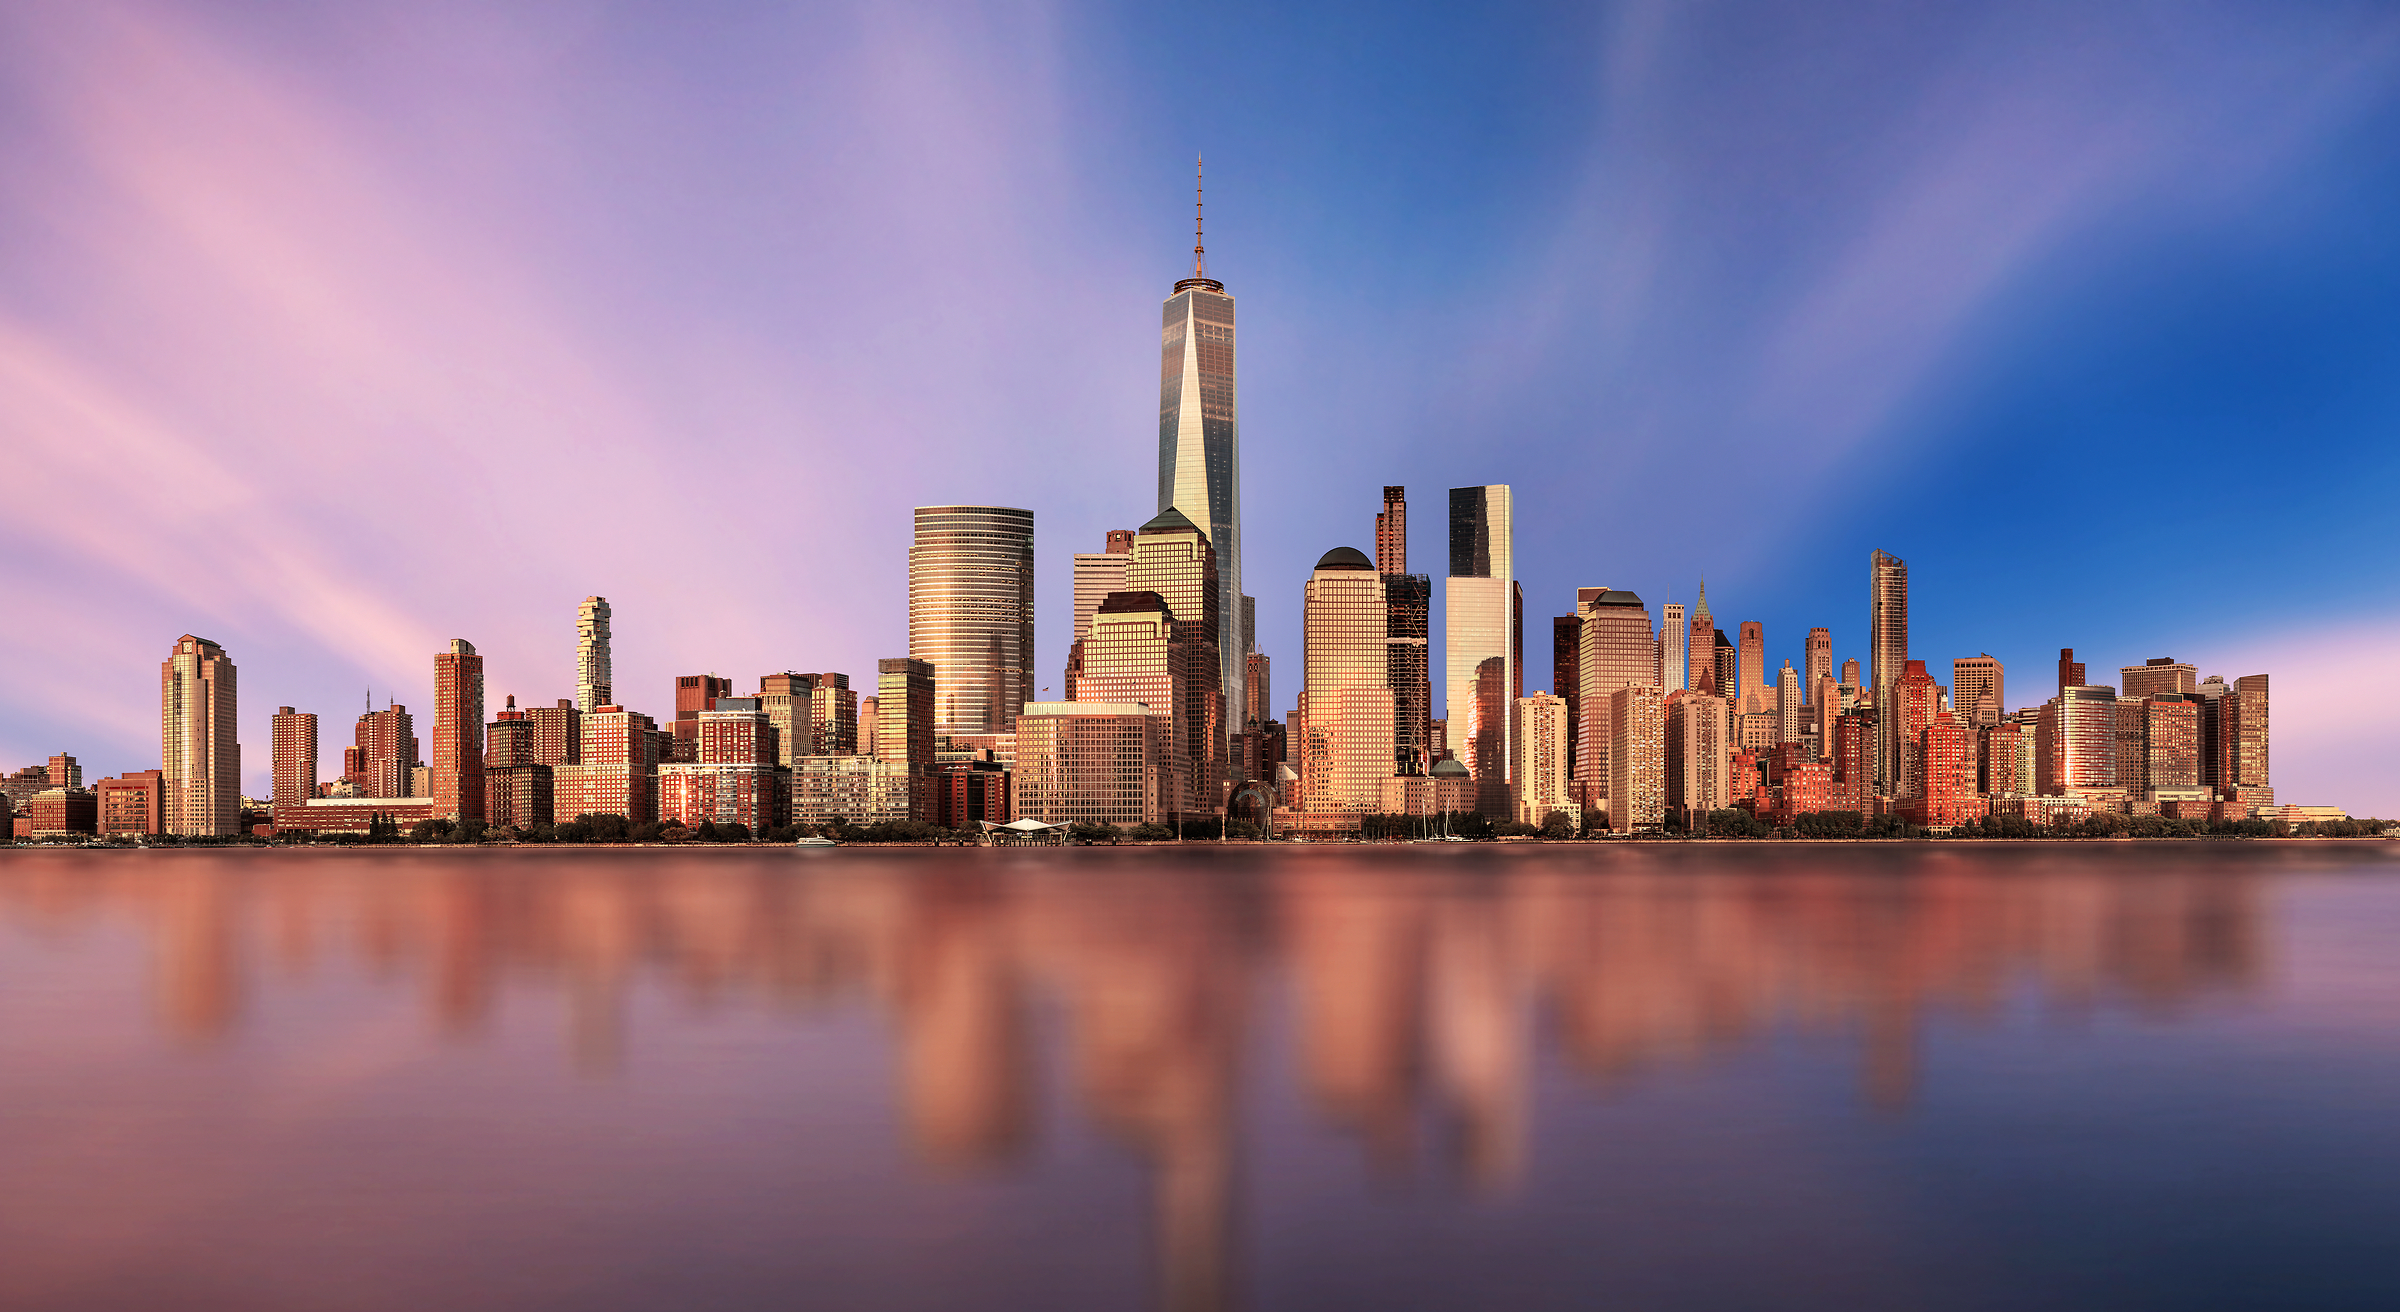 4,201 megapixels! An incredibly high resolution photo of a beautiful sunset, the NYC skyline, and the World Trade Center; cityscape fine art print created by Chris Collacott in Manhattan, New York City.